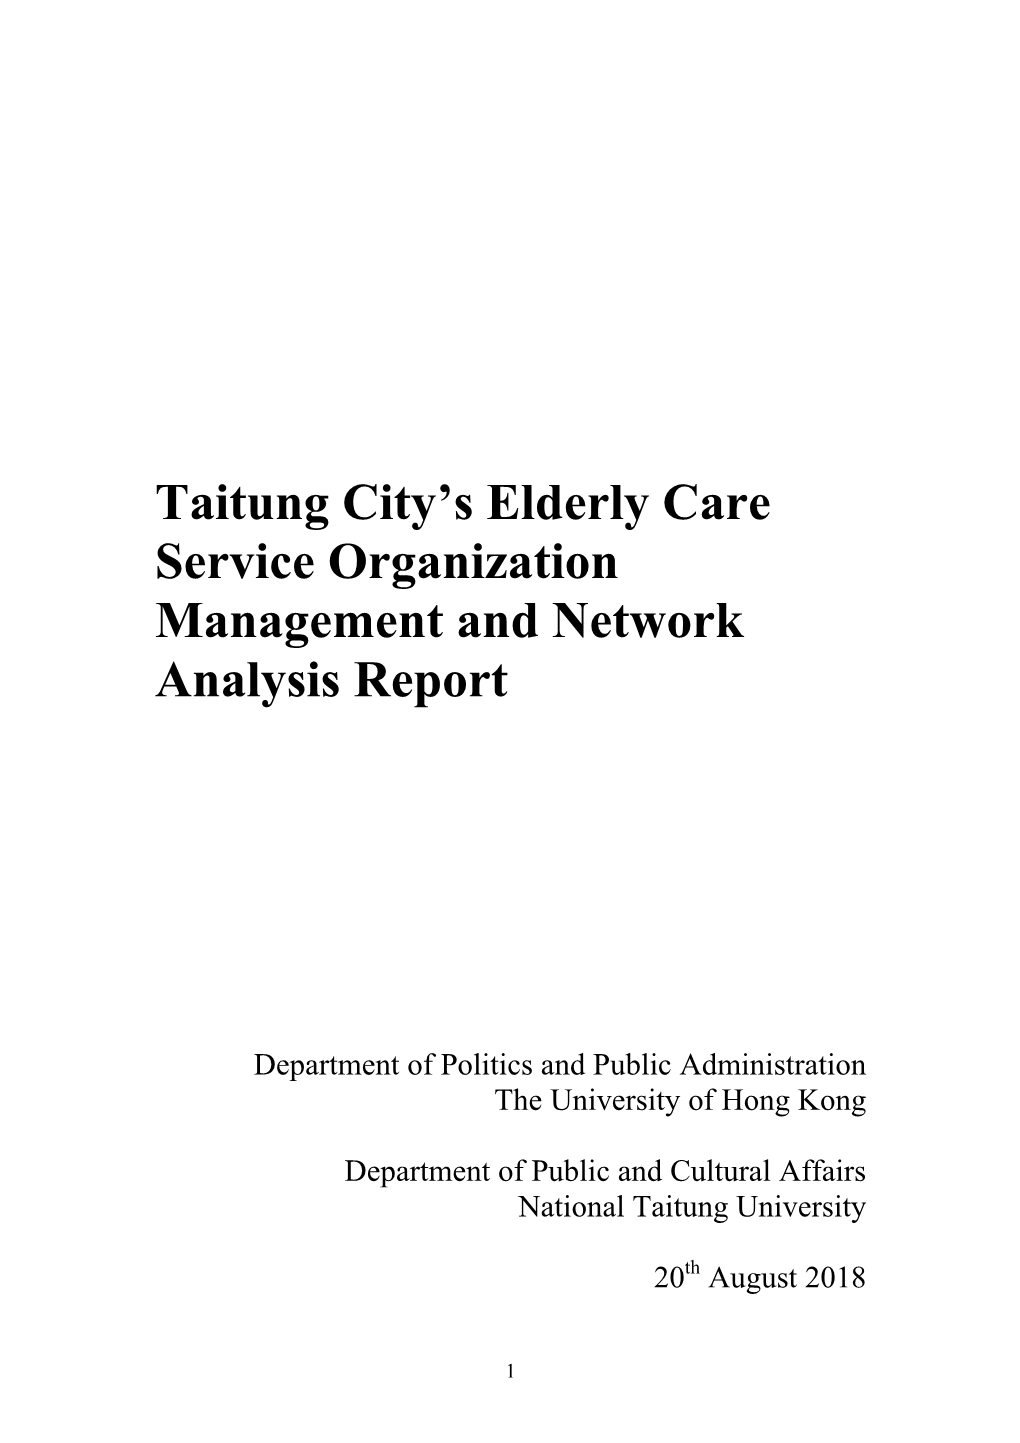 Taitung City's Elderly Care Service Organization Management and Network Analysis Report